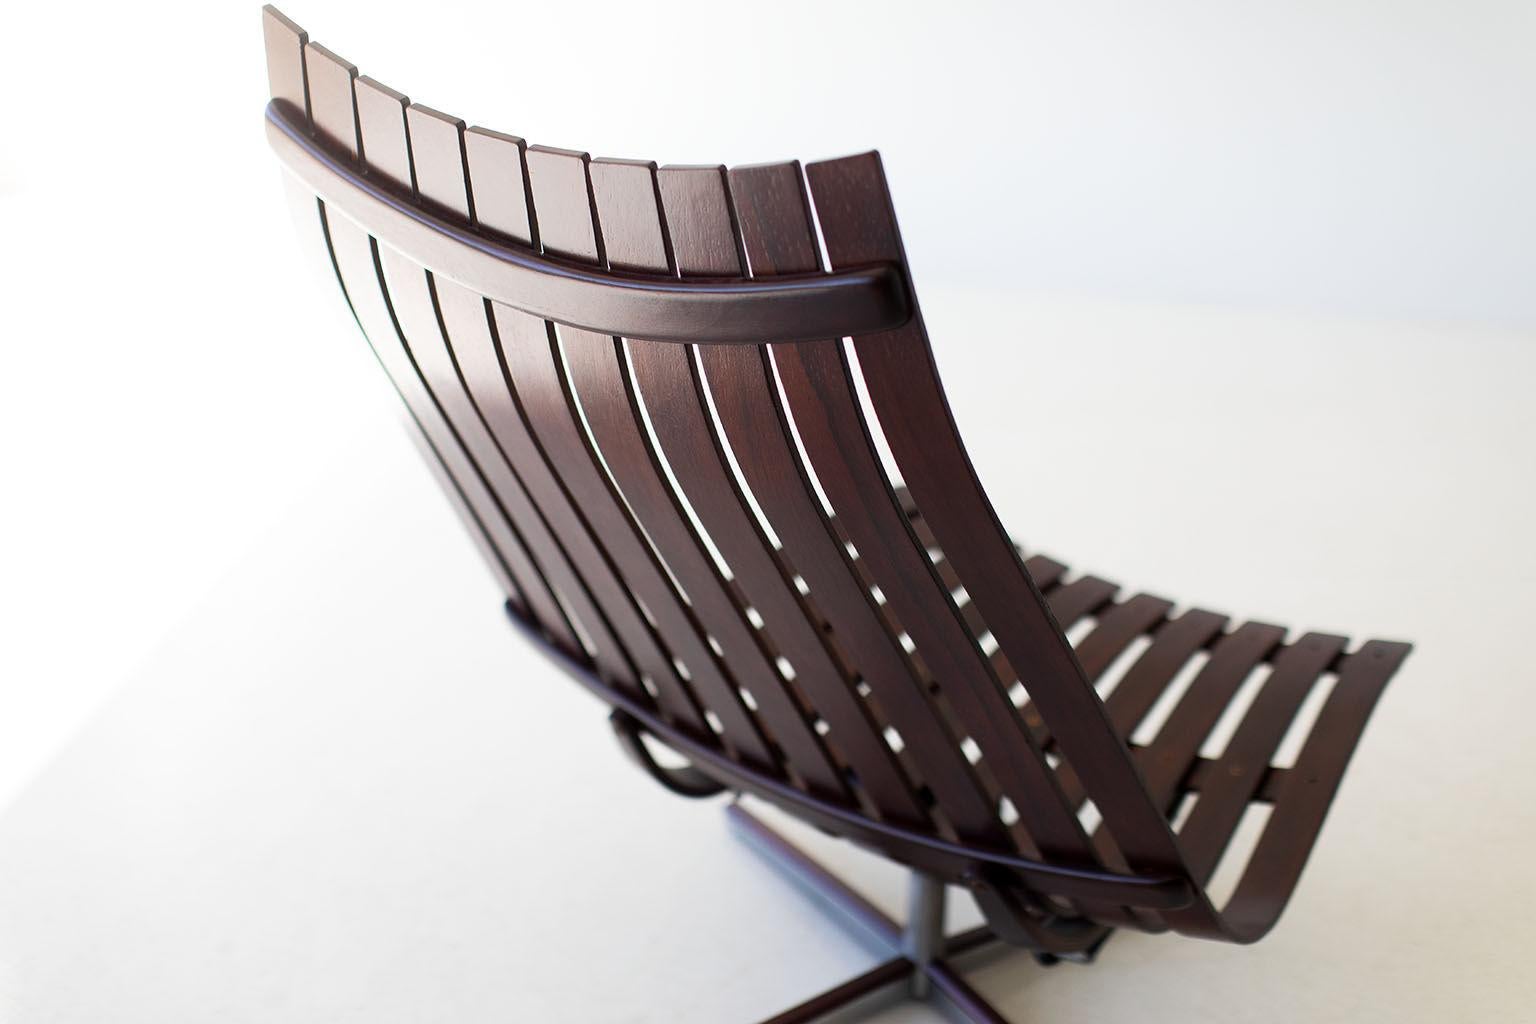 Designer: Hans Brattrud 

Manufacturer: Hove Mobler
Period or model: Mid-Century Modern. 
Specs: Rosewood, leather

Condition: 

This Hans Brattrud rosewood lounge chair for Hove Mobler is in very good vintage condition. The rosewood has